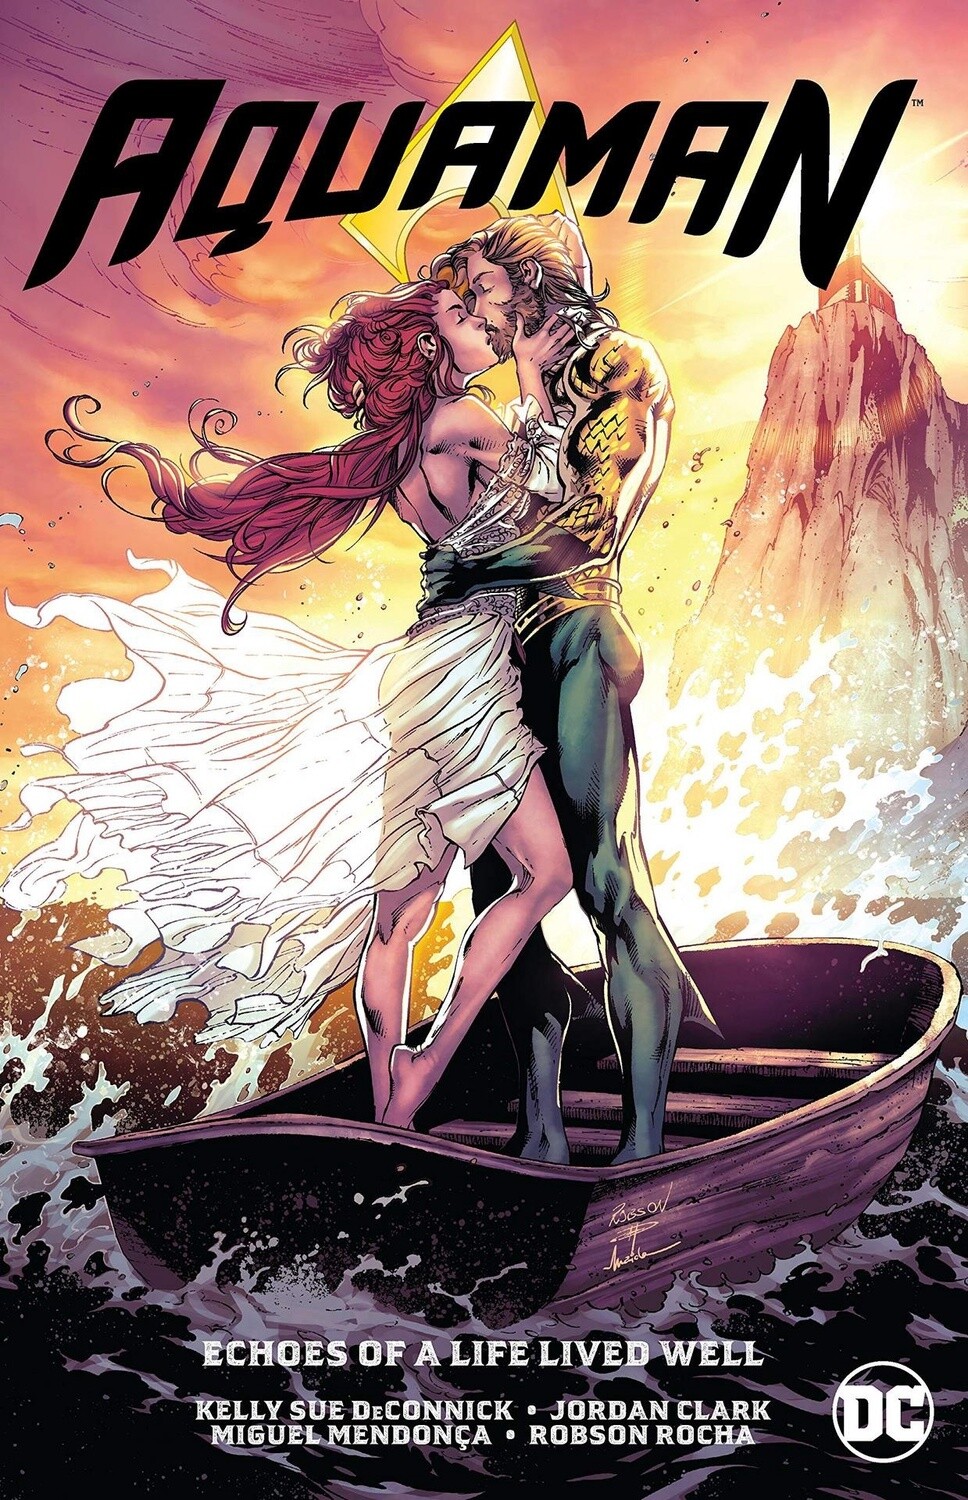 Aquaman Vol. 4: Echoes of a Life Lived Well